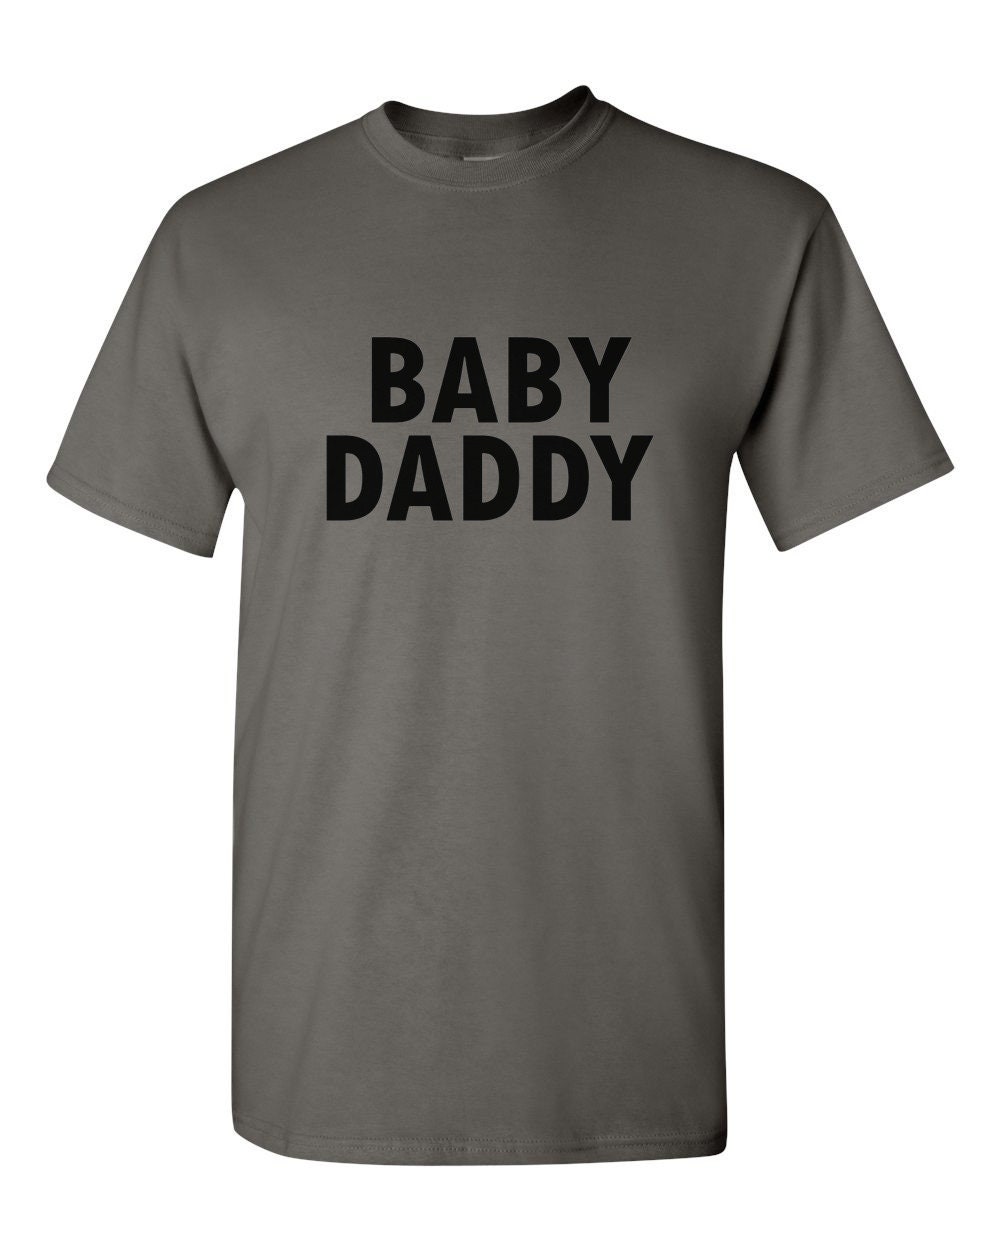 Baby Daddy Shirt Super Dad T-Shirt Daddy Tee Christmas | Etsy